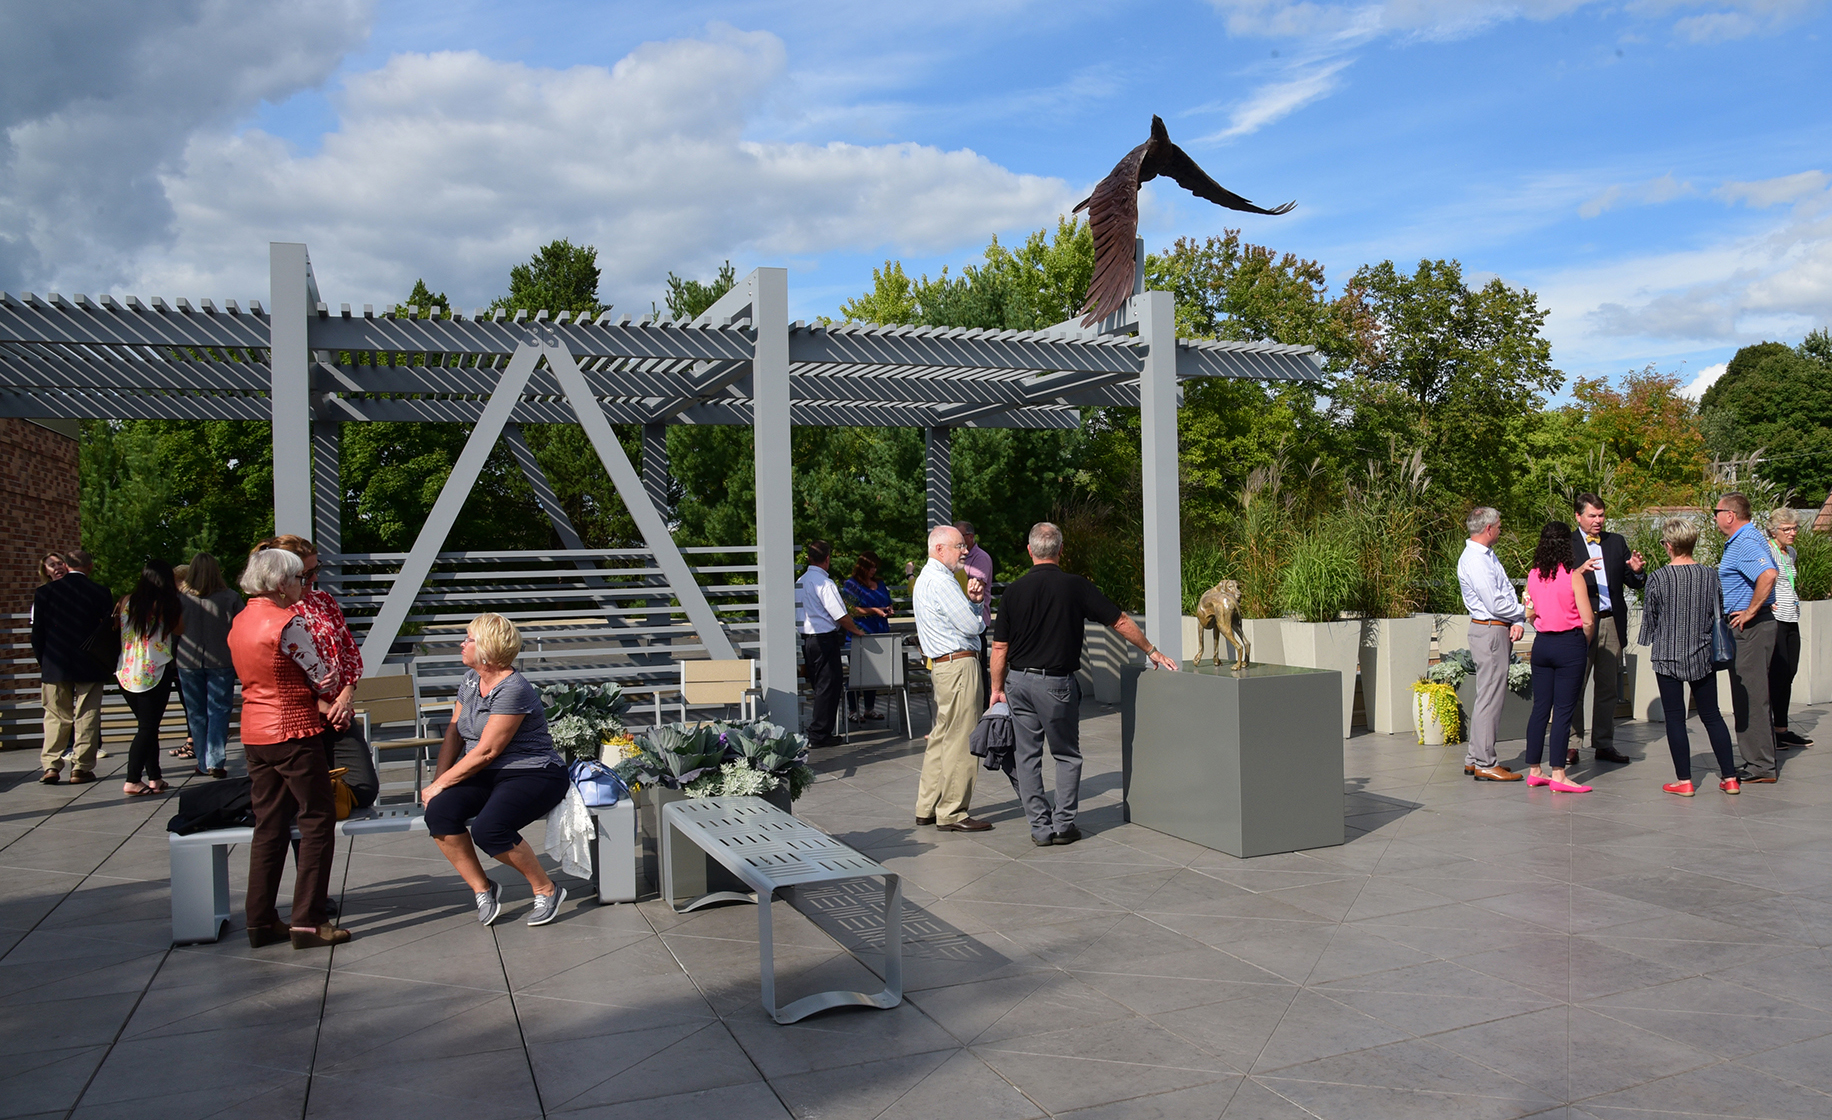 People gather in the Rooftop Sculpture Garden on a sunny day.